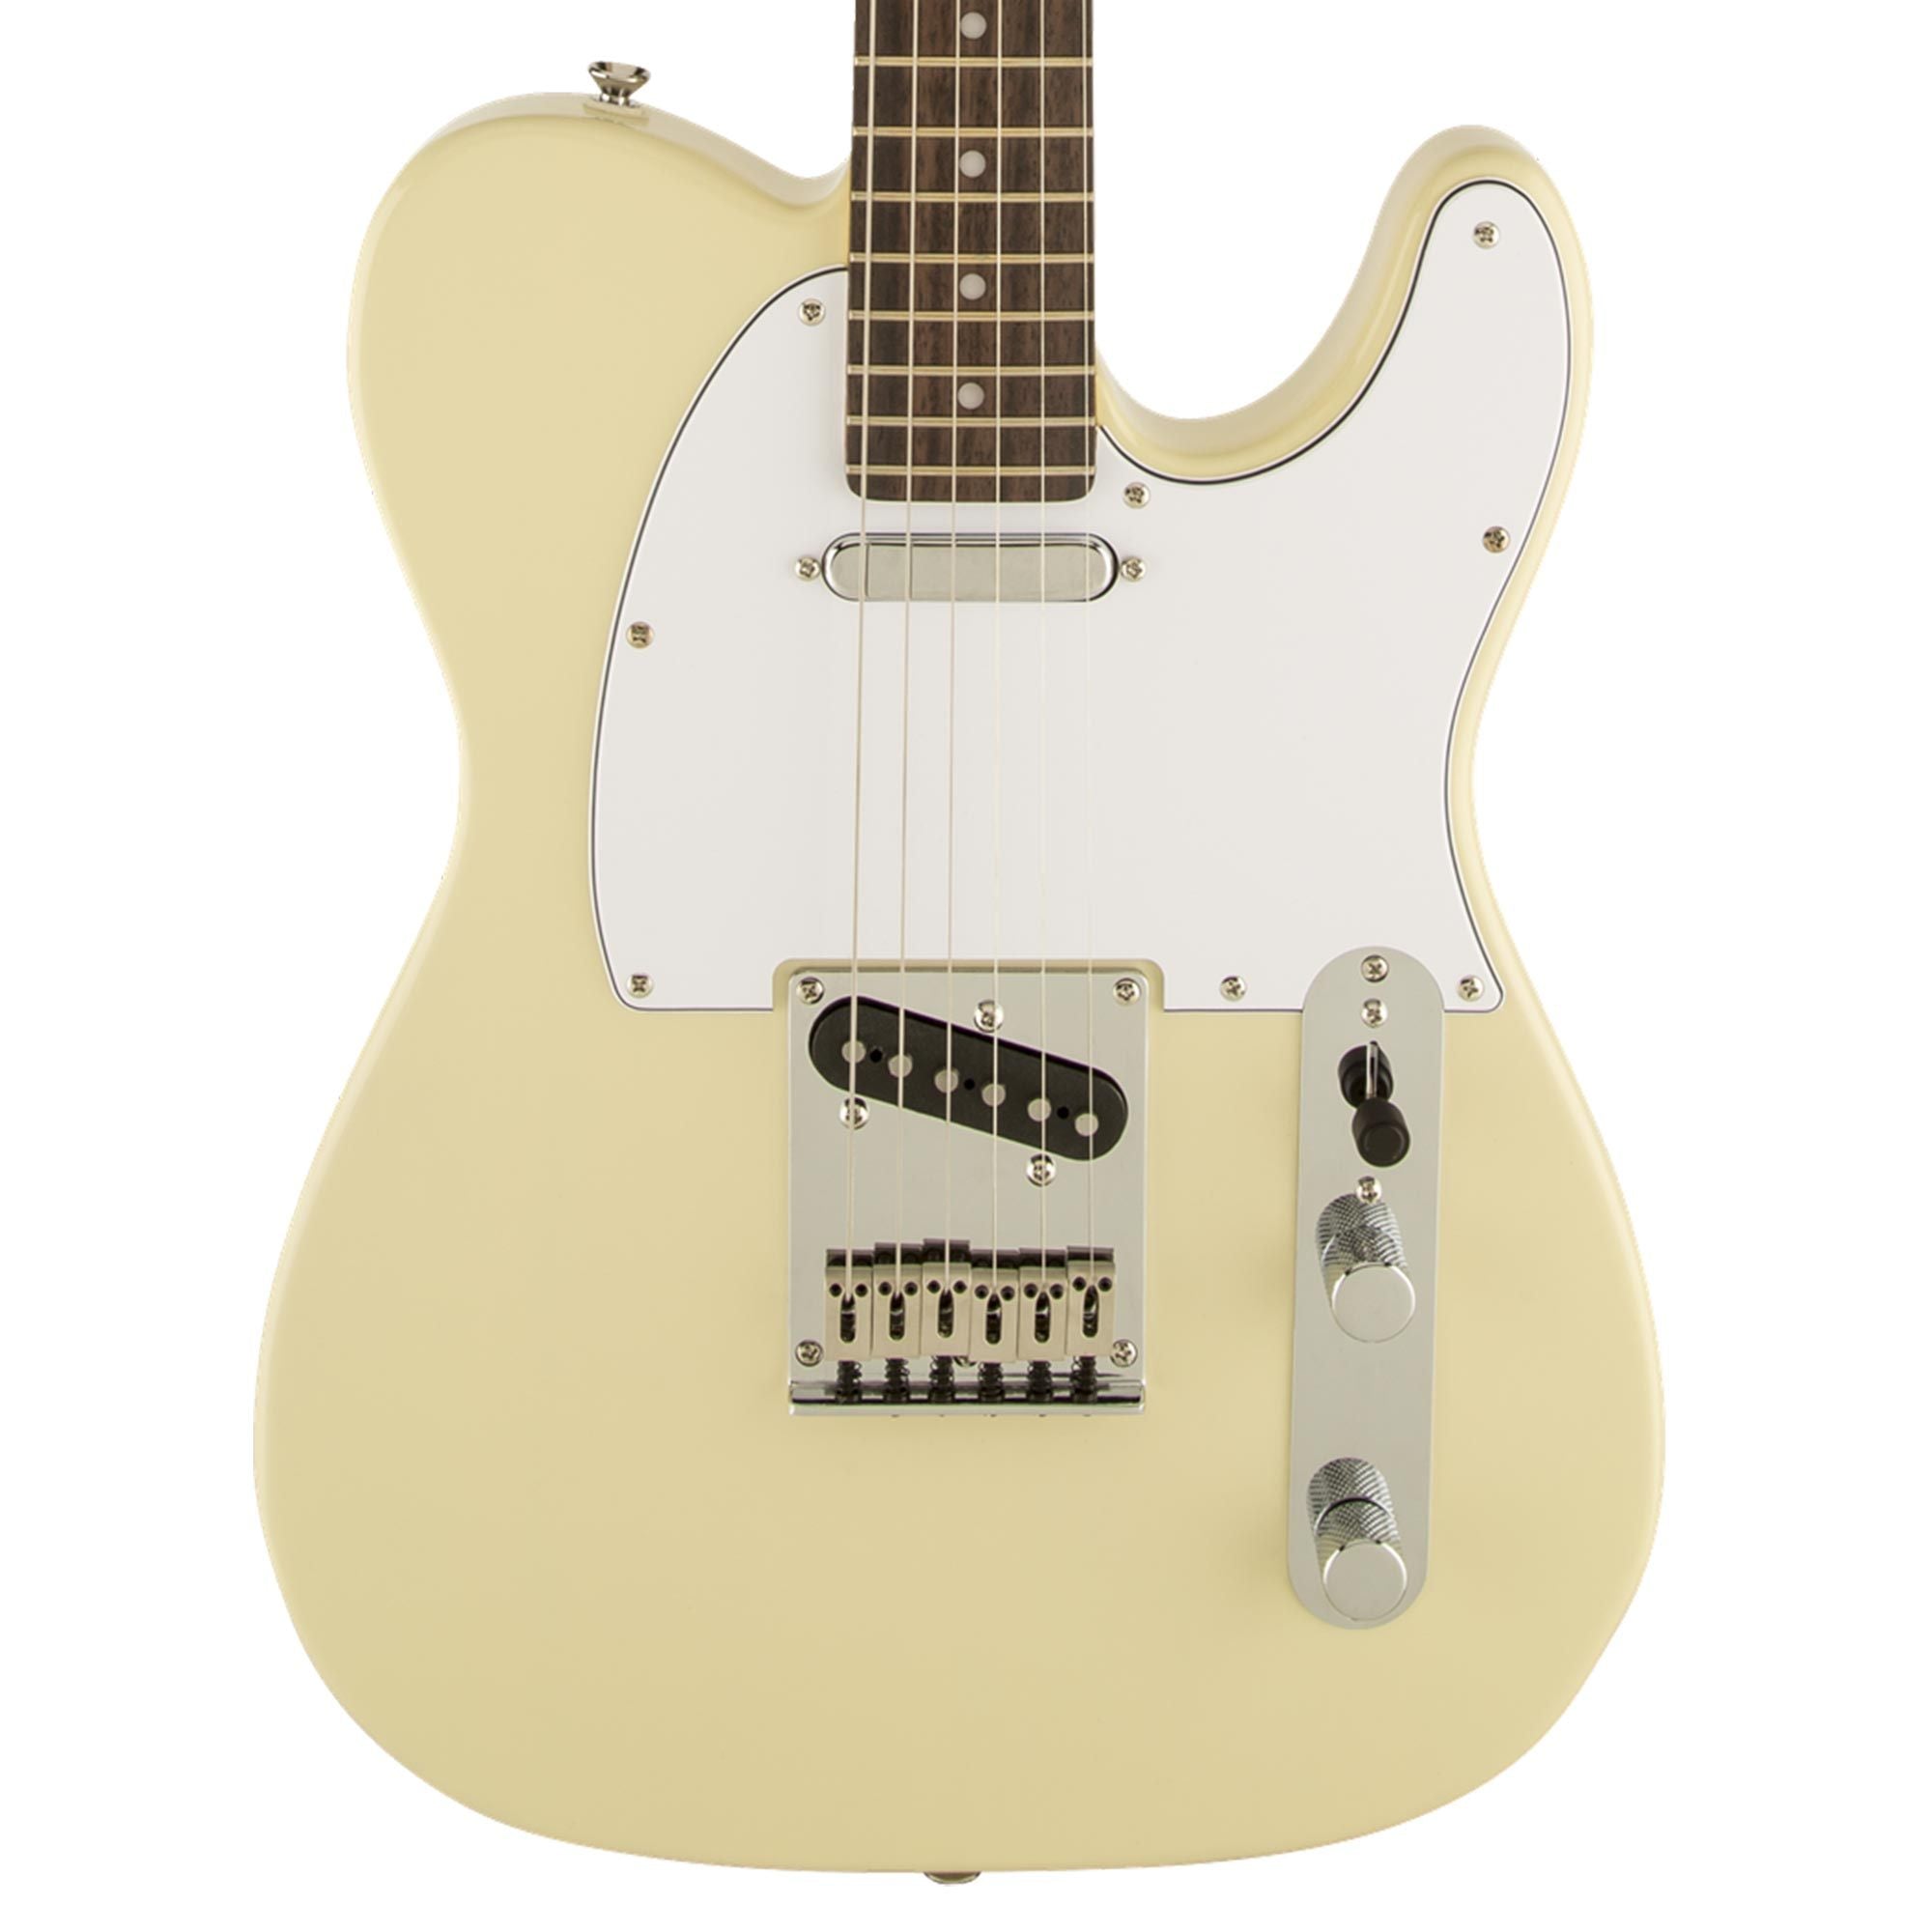 Squier Standard Telecaster Vintage Blonde | The Music Zoo